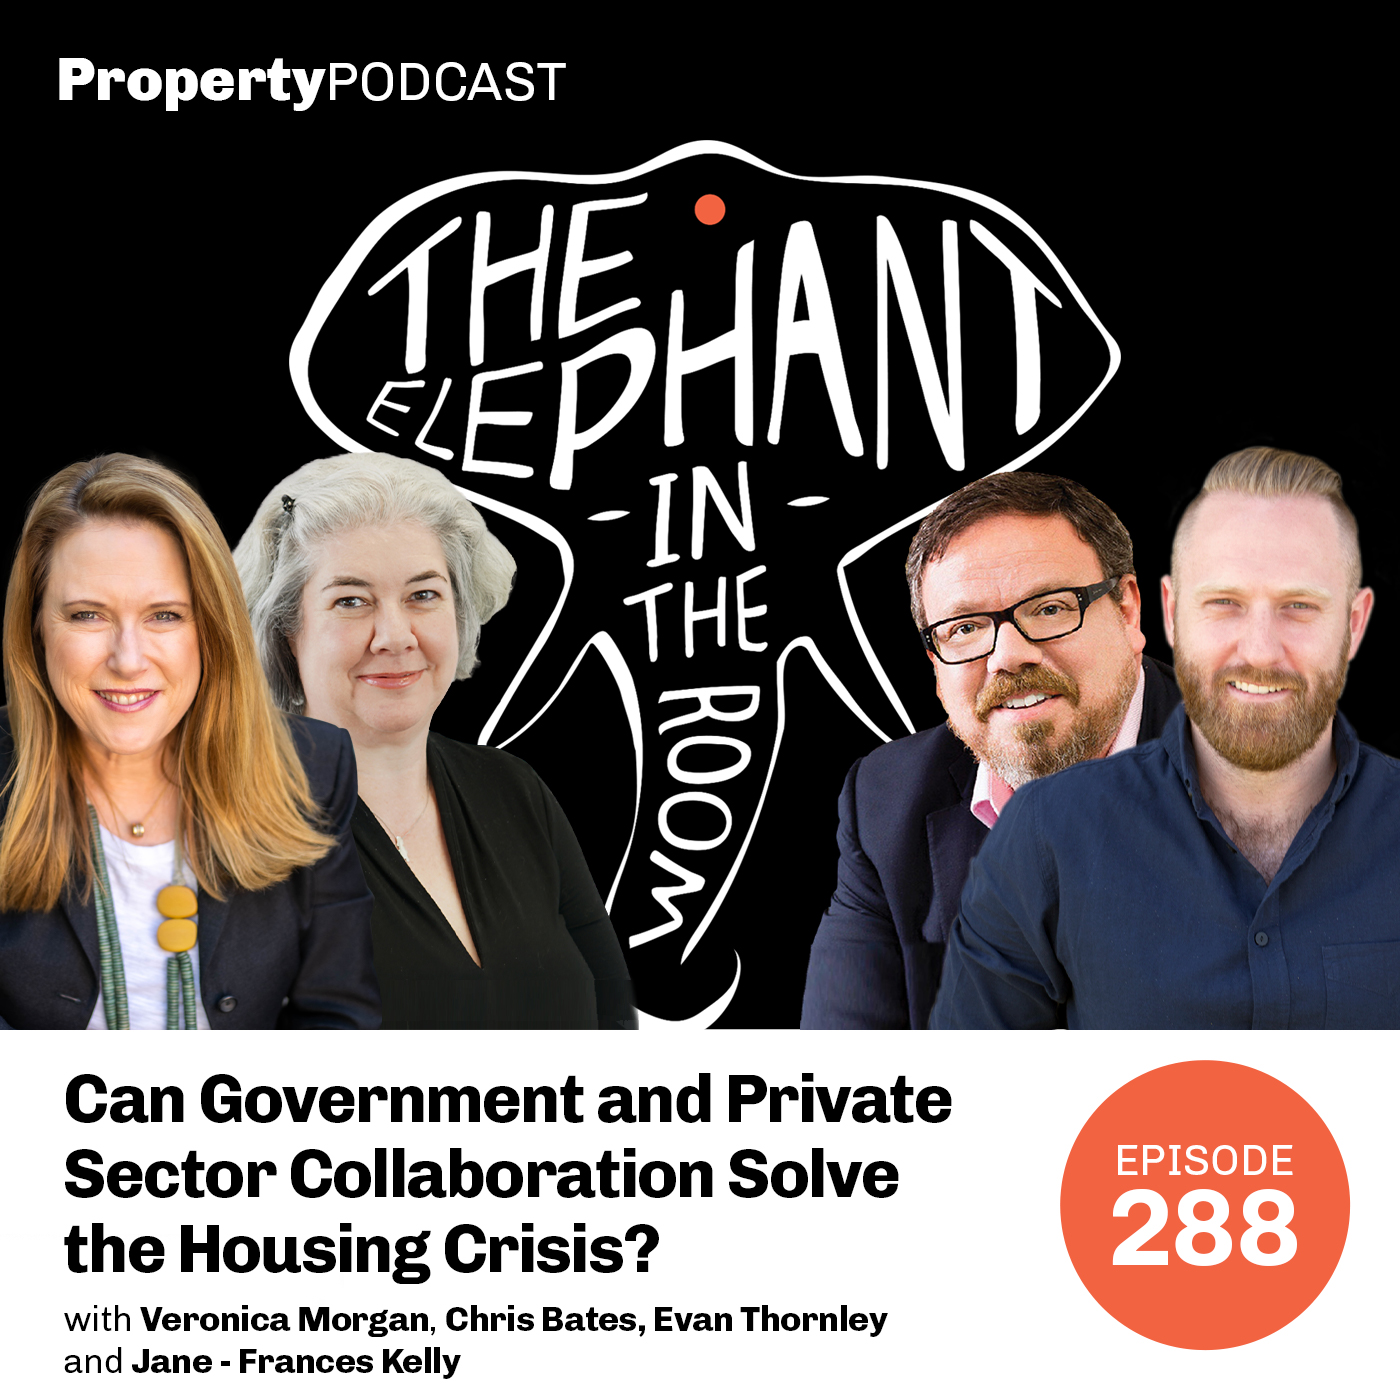 Can Government and Private Sector Collaboration Solve the Housing Crisis?